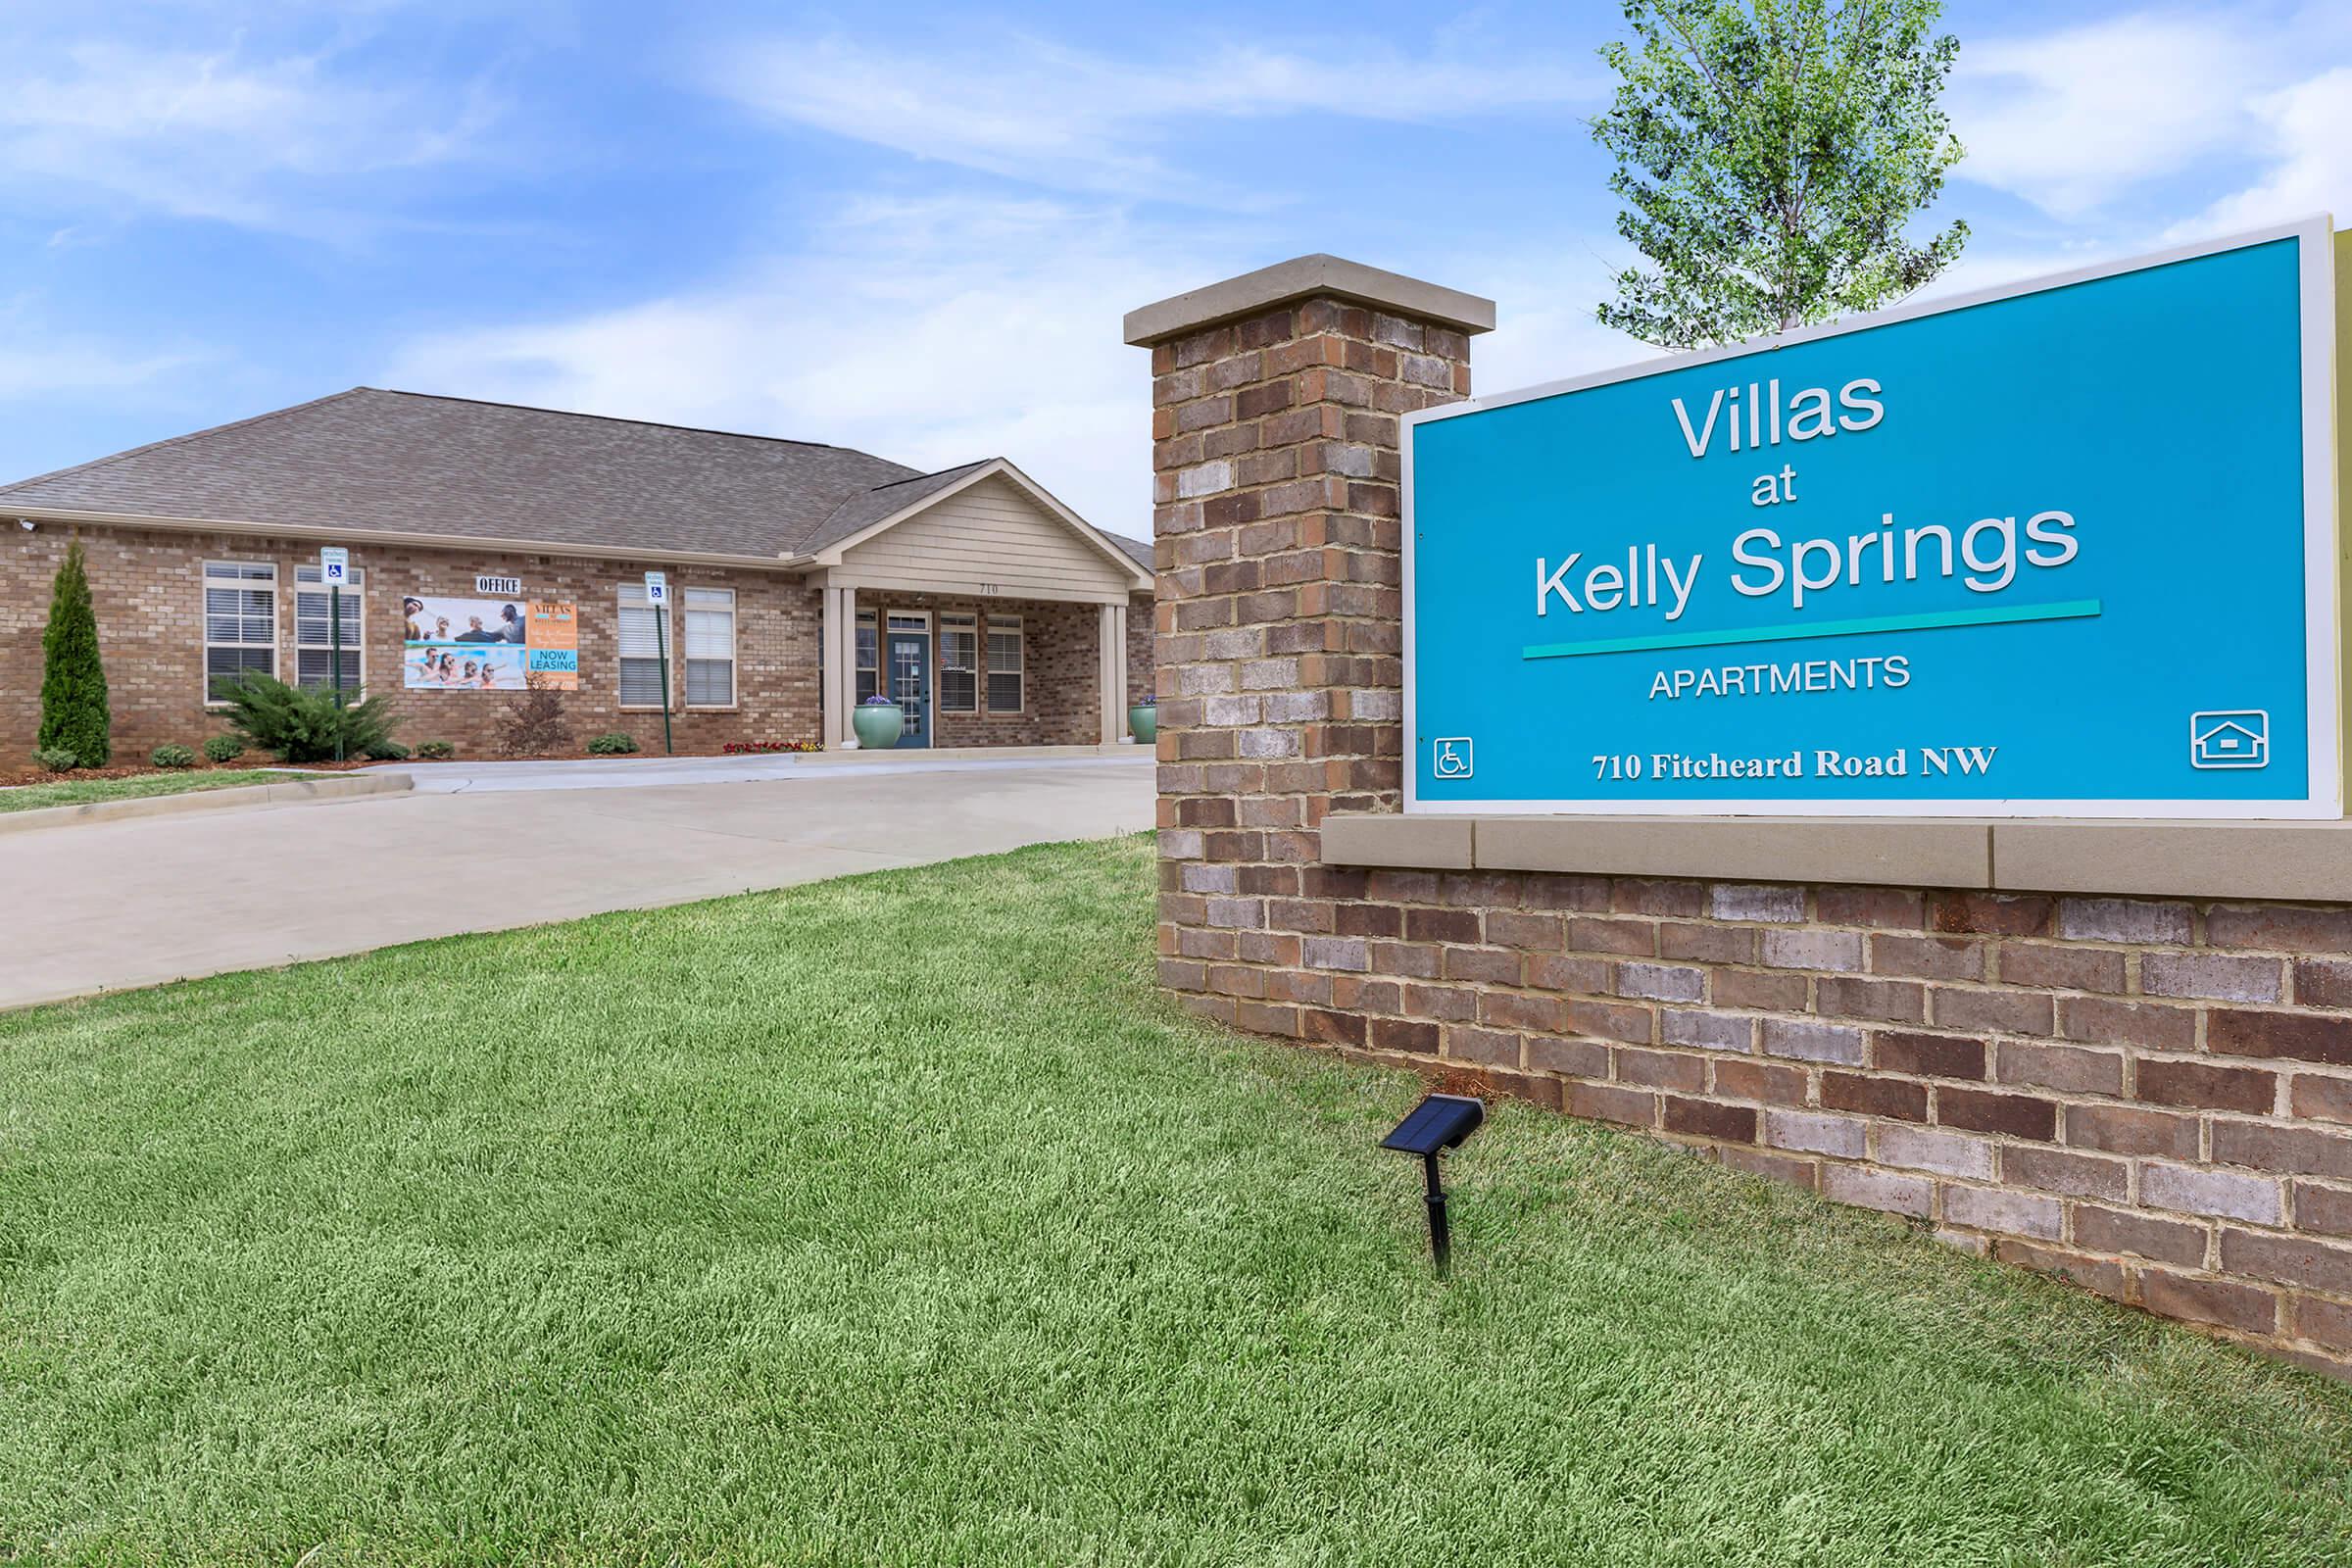 Welcome to Villas at Kelly Springs apartments